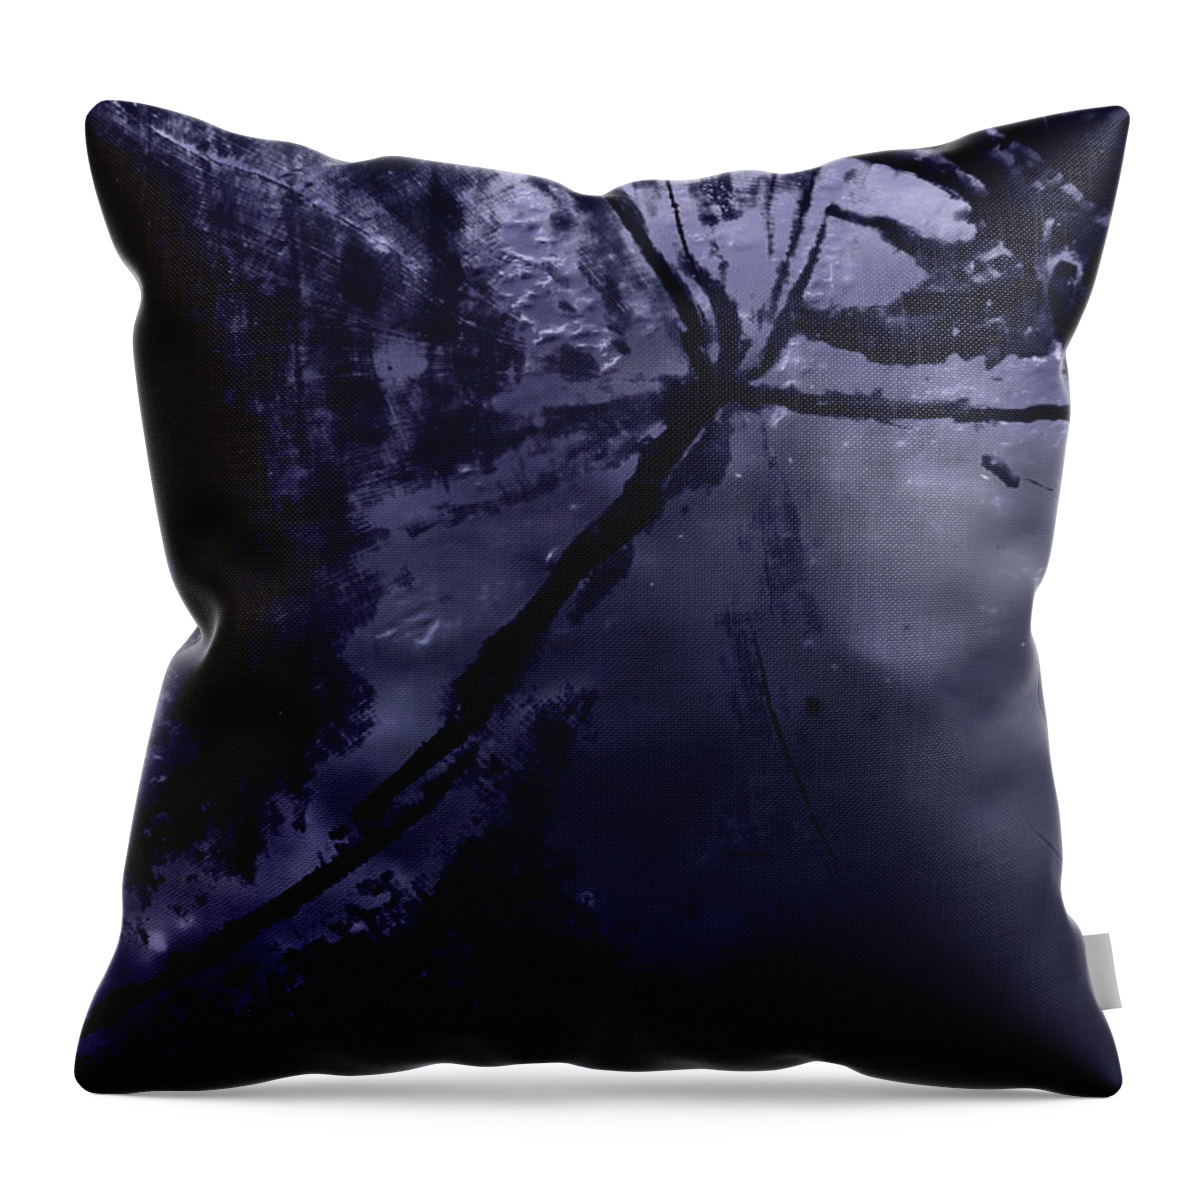 Space Throw Pillow featuring the photograph Space Dropping by John Hansen